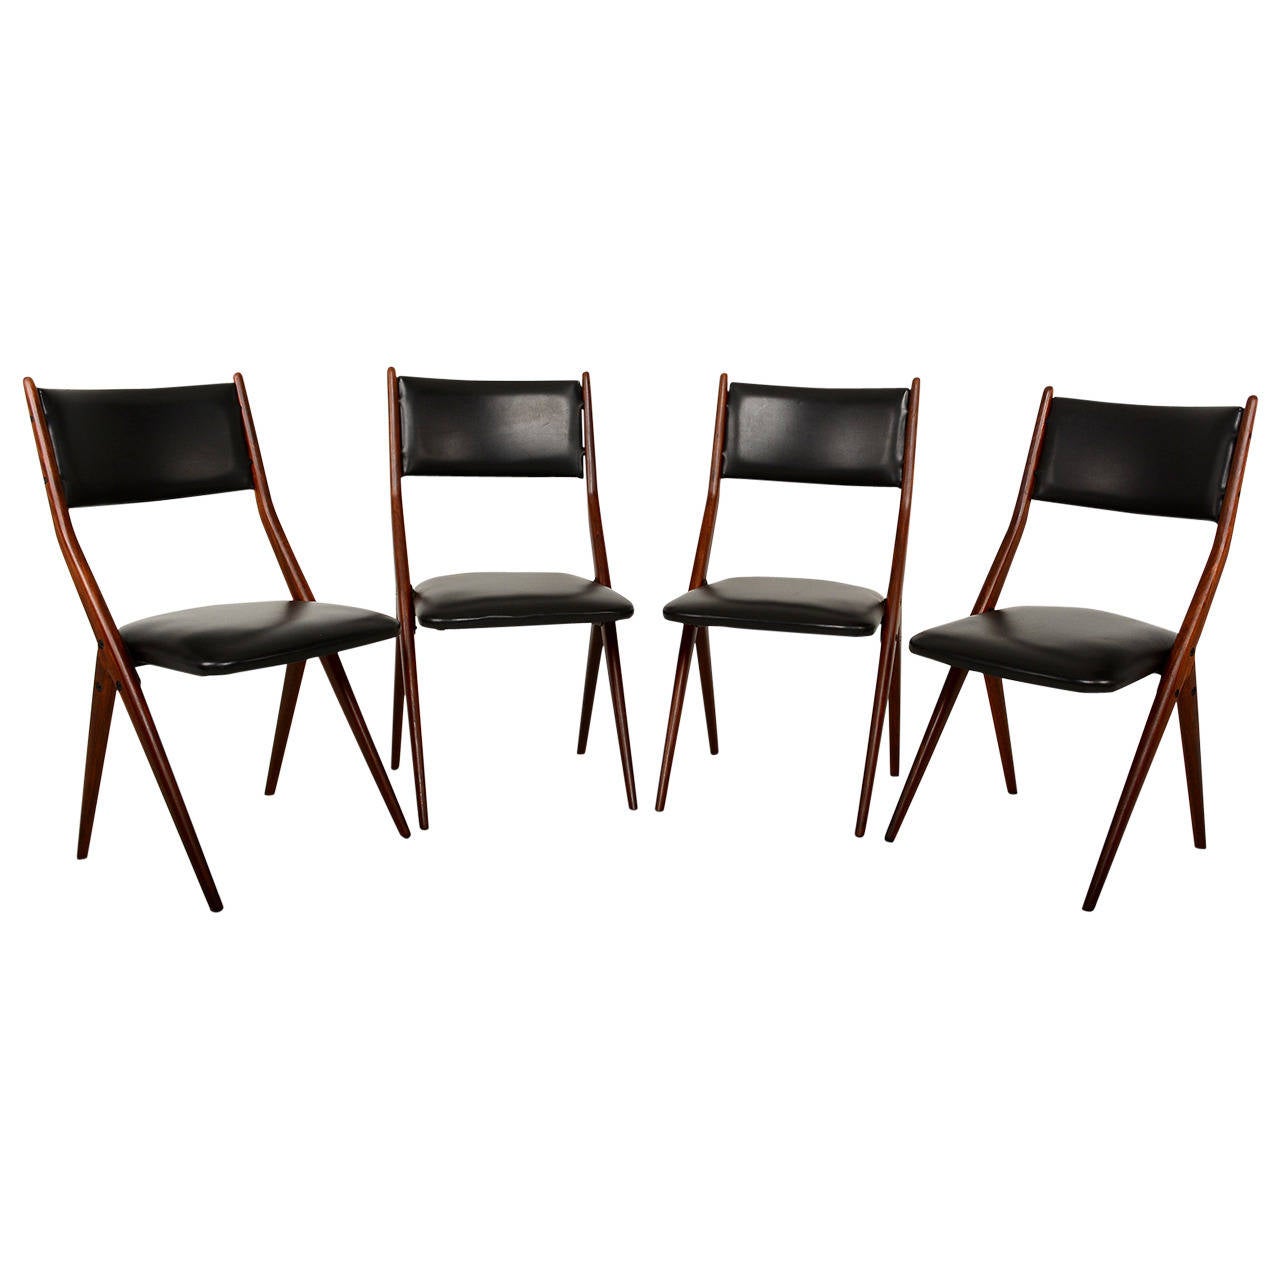 For your consideration a set of four mahogany chairs with faux black leather. 

Sculptural scissor shape. Firm and sturdy.

 